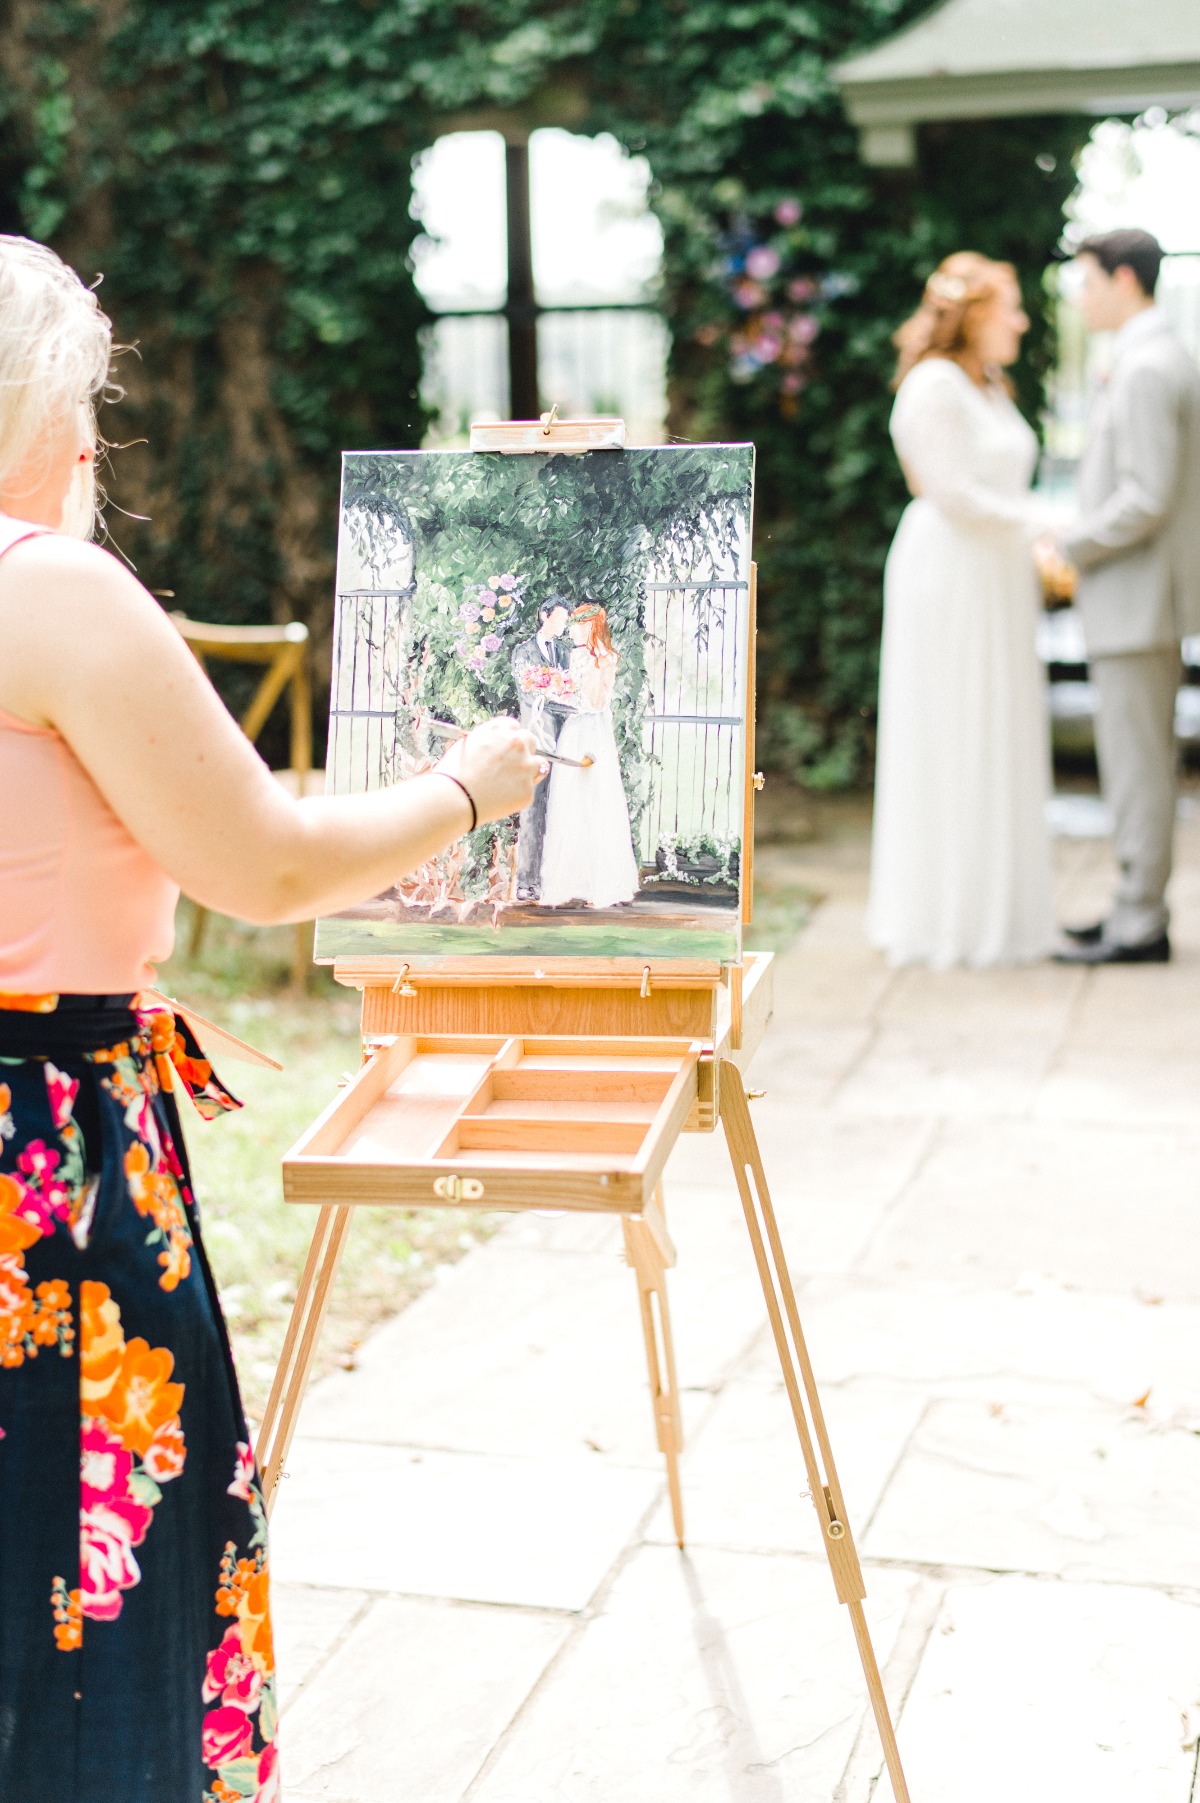 Live painting of your ceremony